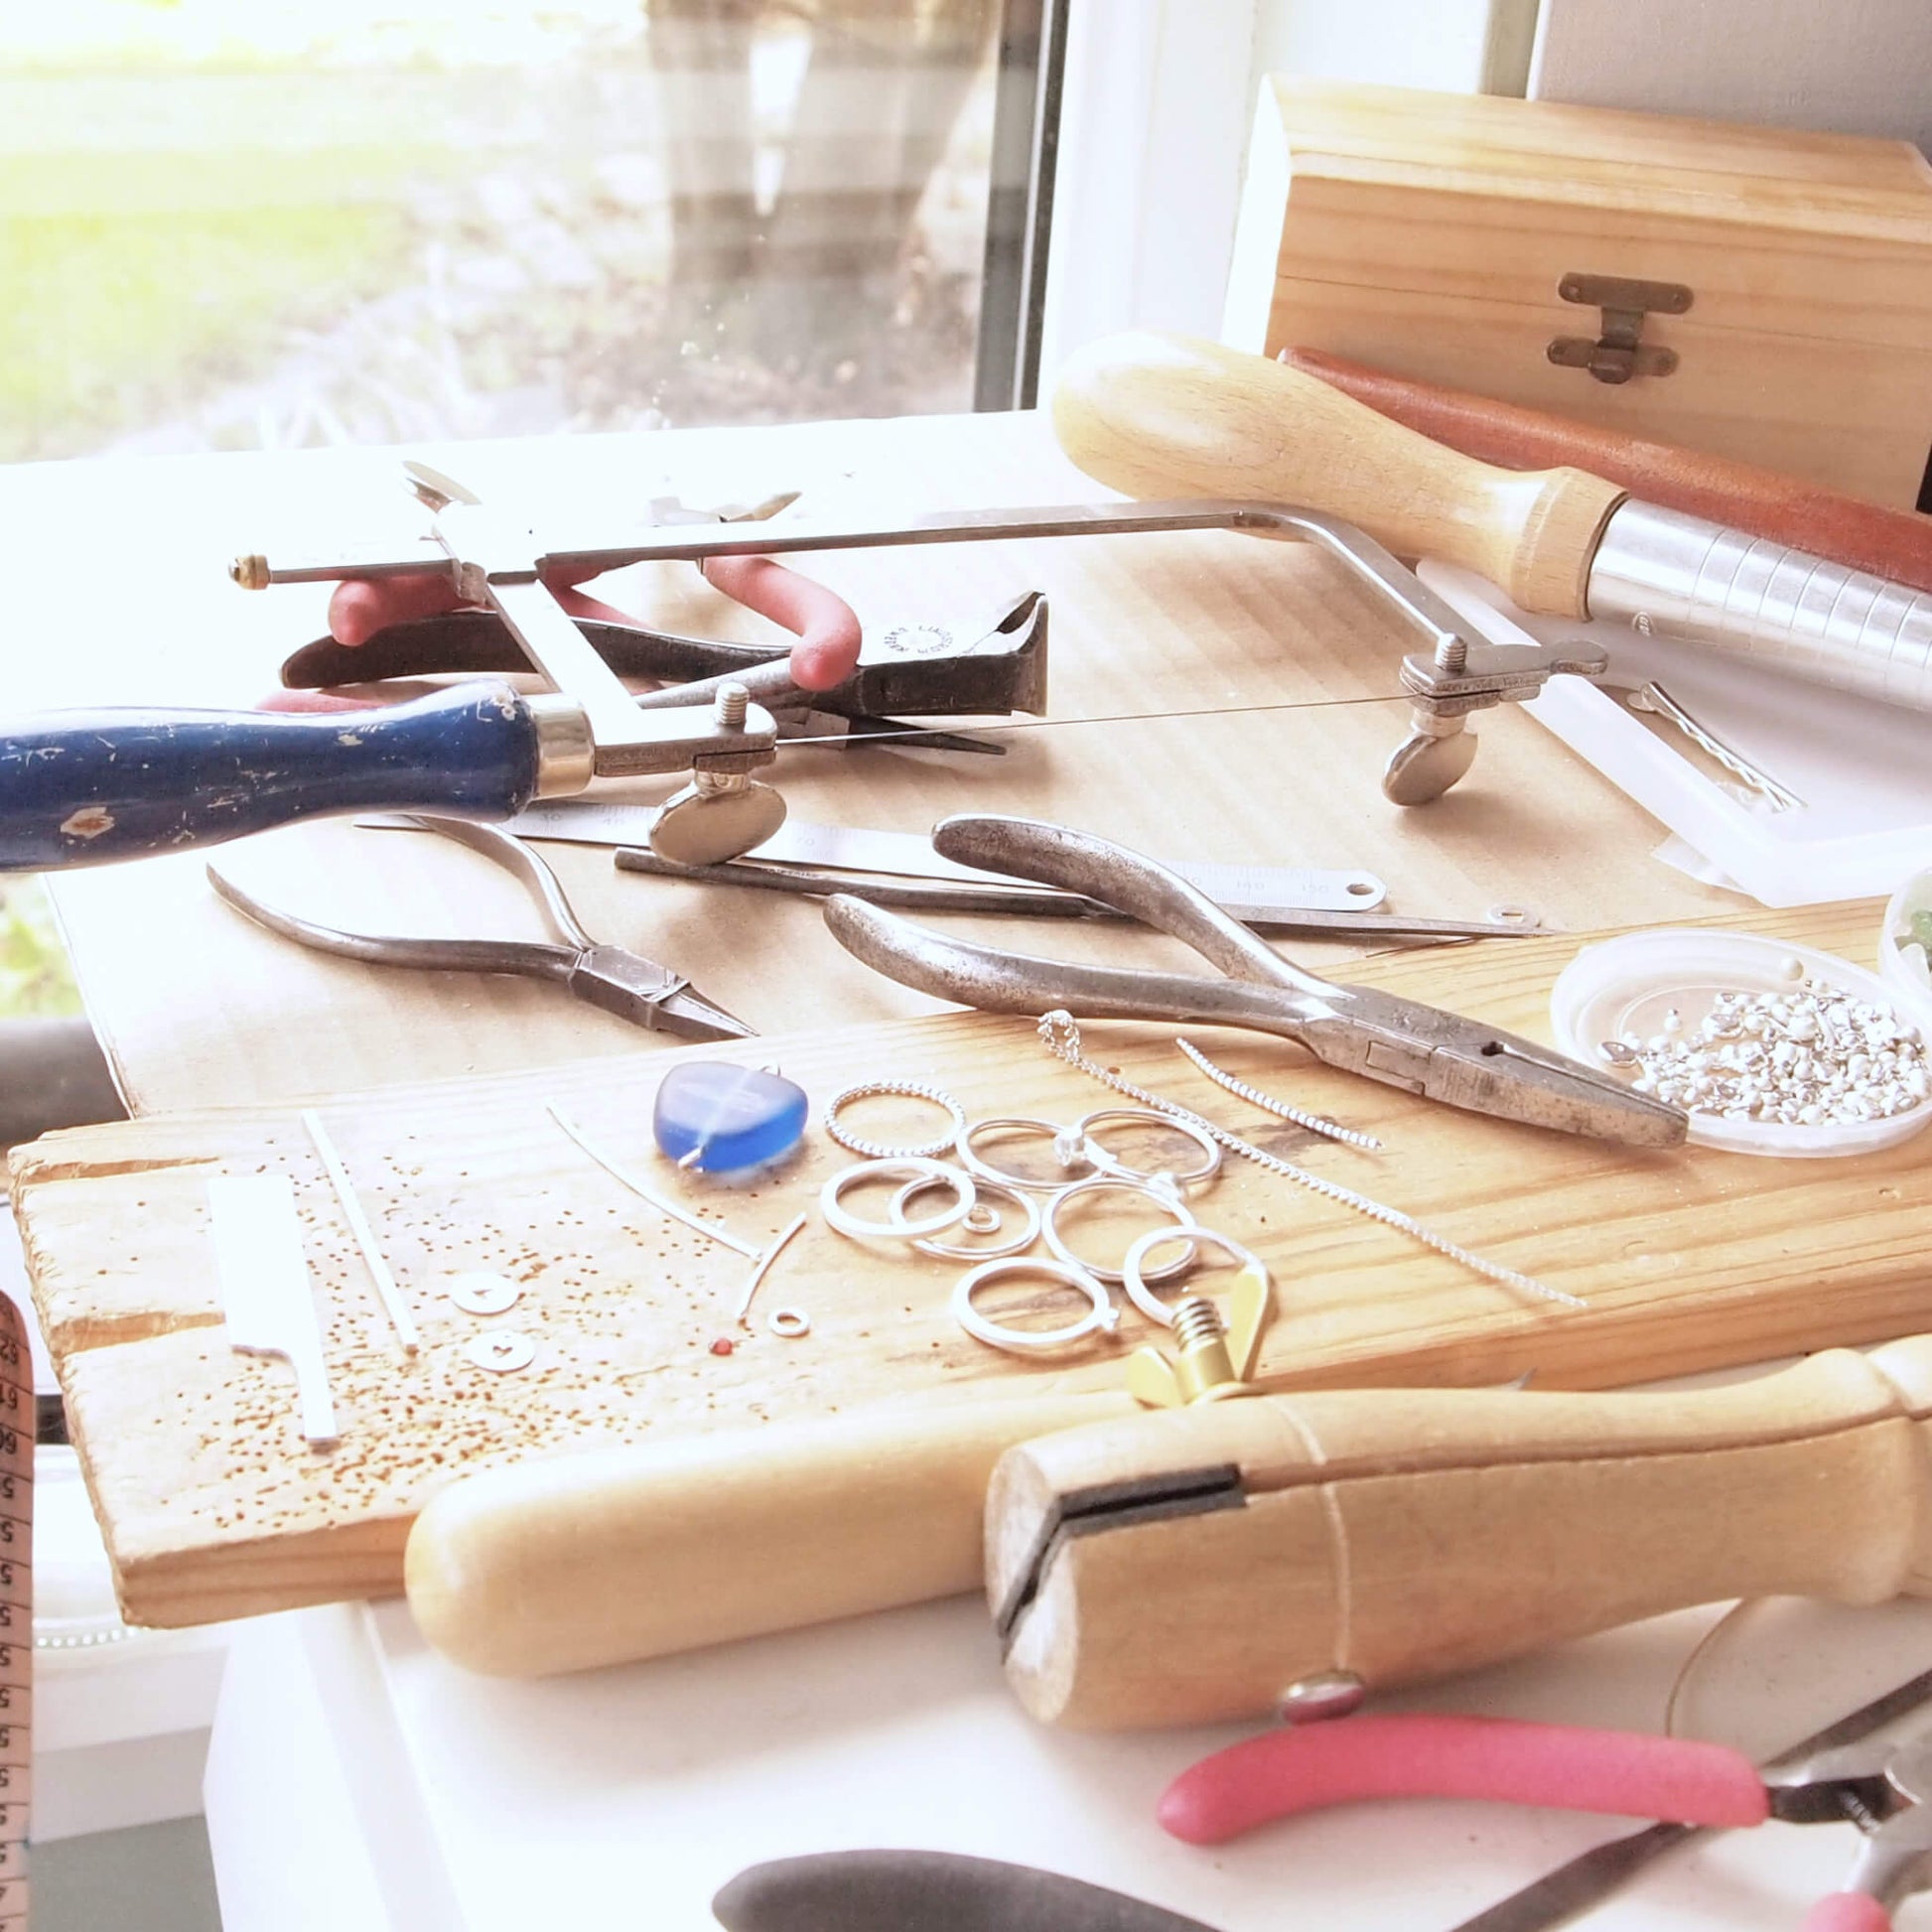 Maram Jewellery's sunny studio workbench. Image shows a light filled desk with jewellers tools, pliers and saw, alongside silver jewellery in the process of being made.